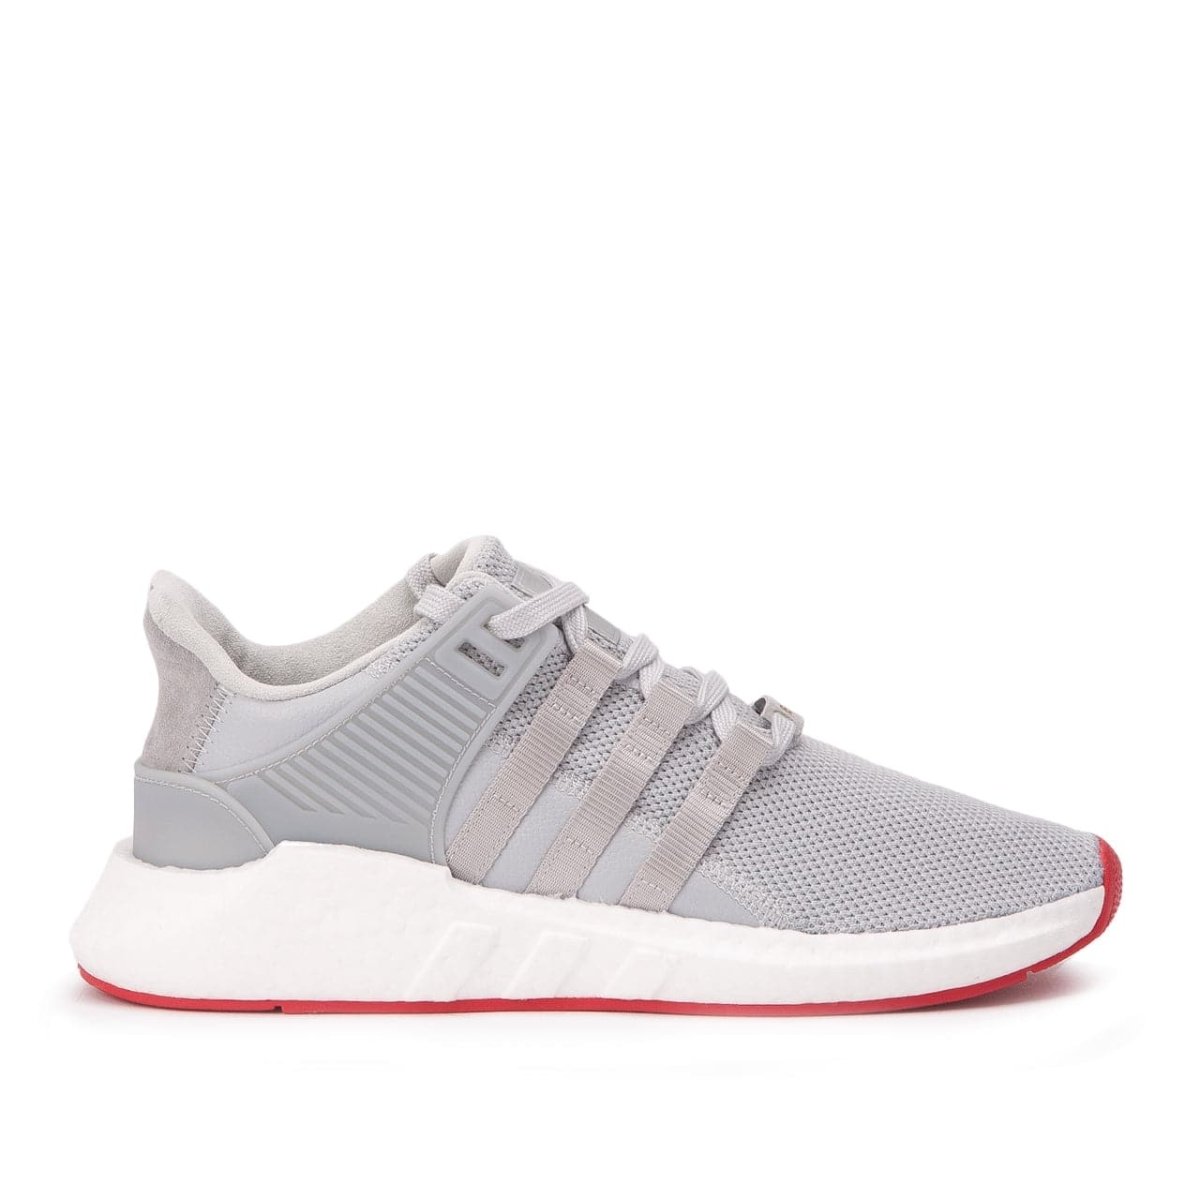 Ministerio réplica habilitar adidas EQT Support 93/17 Boost 'Red Carpet Pack' (Silver / White / Red)  CQ2393 – Allike Store